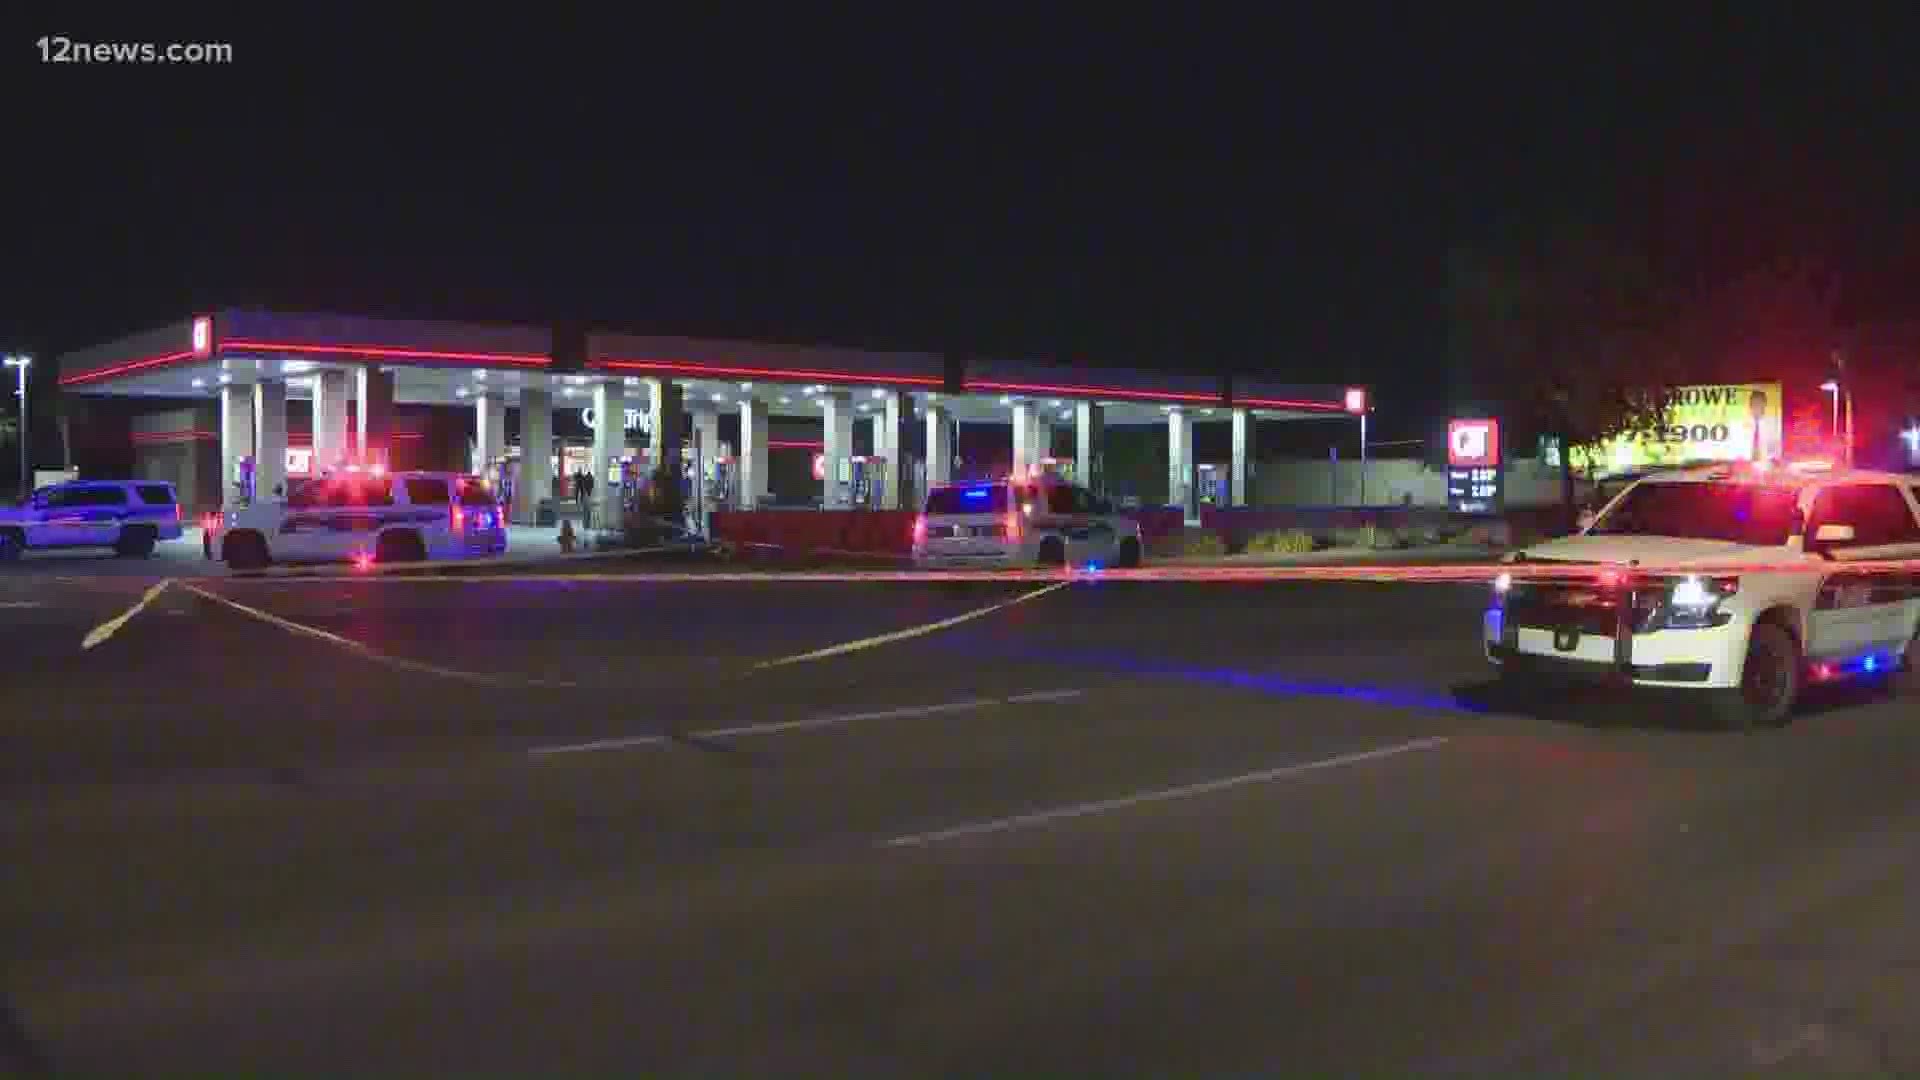 The Phoenix Police Department says the shooting happened behind a business near Glendale and 19th avenues.